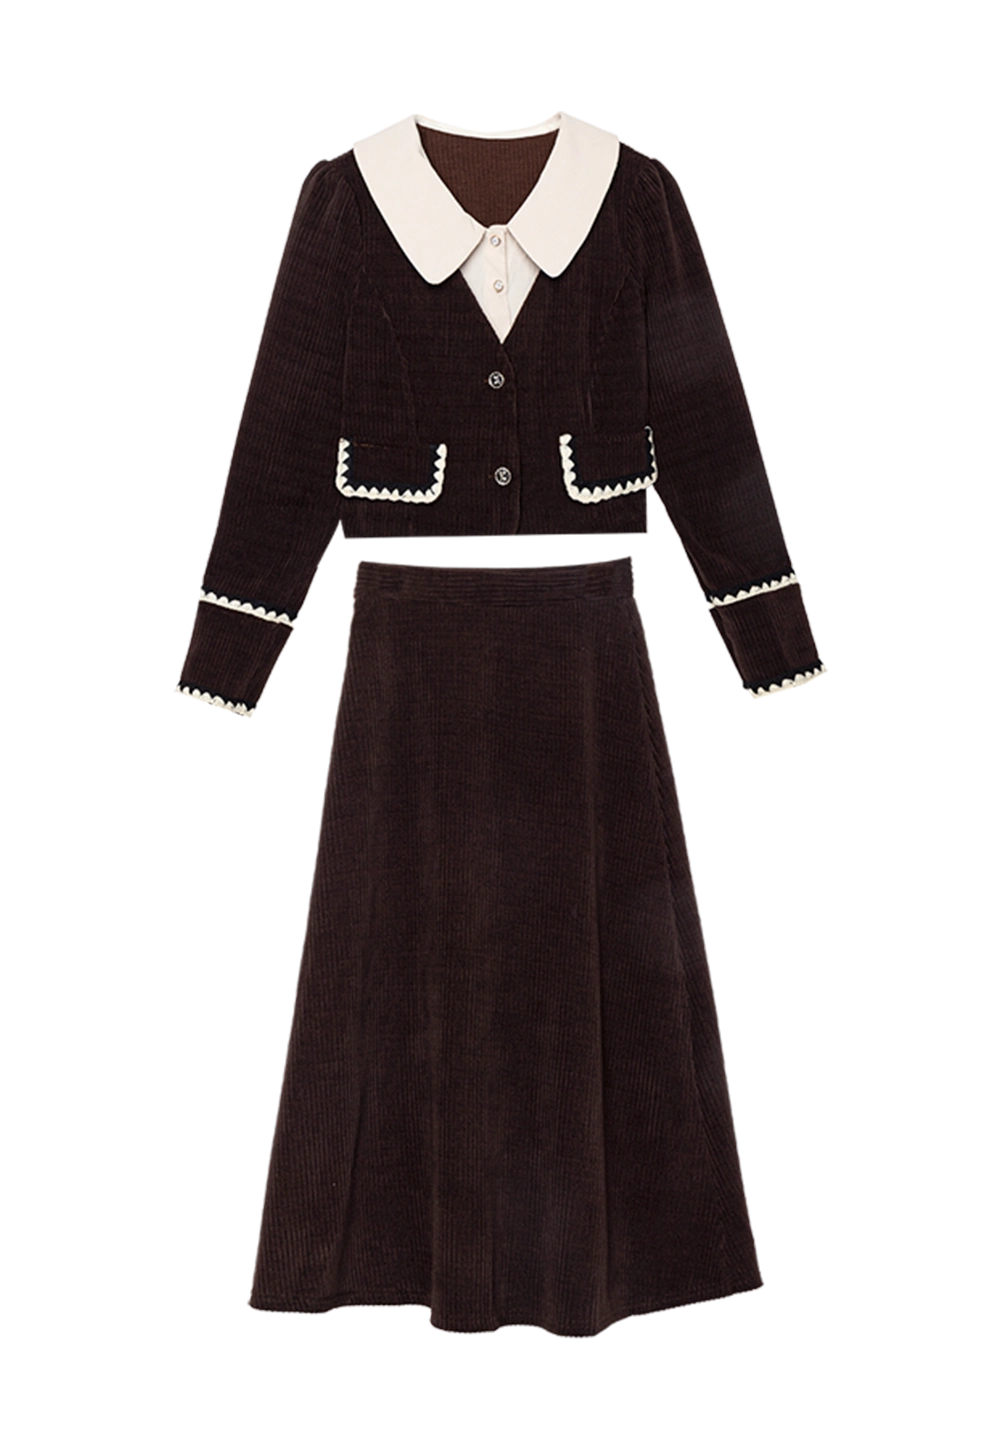 Women's Two-Piece Set: Black Long Sleeve Top with White Collar and Trim, and A-Line Skirt